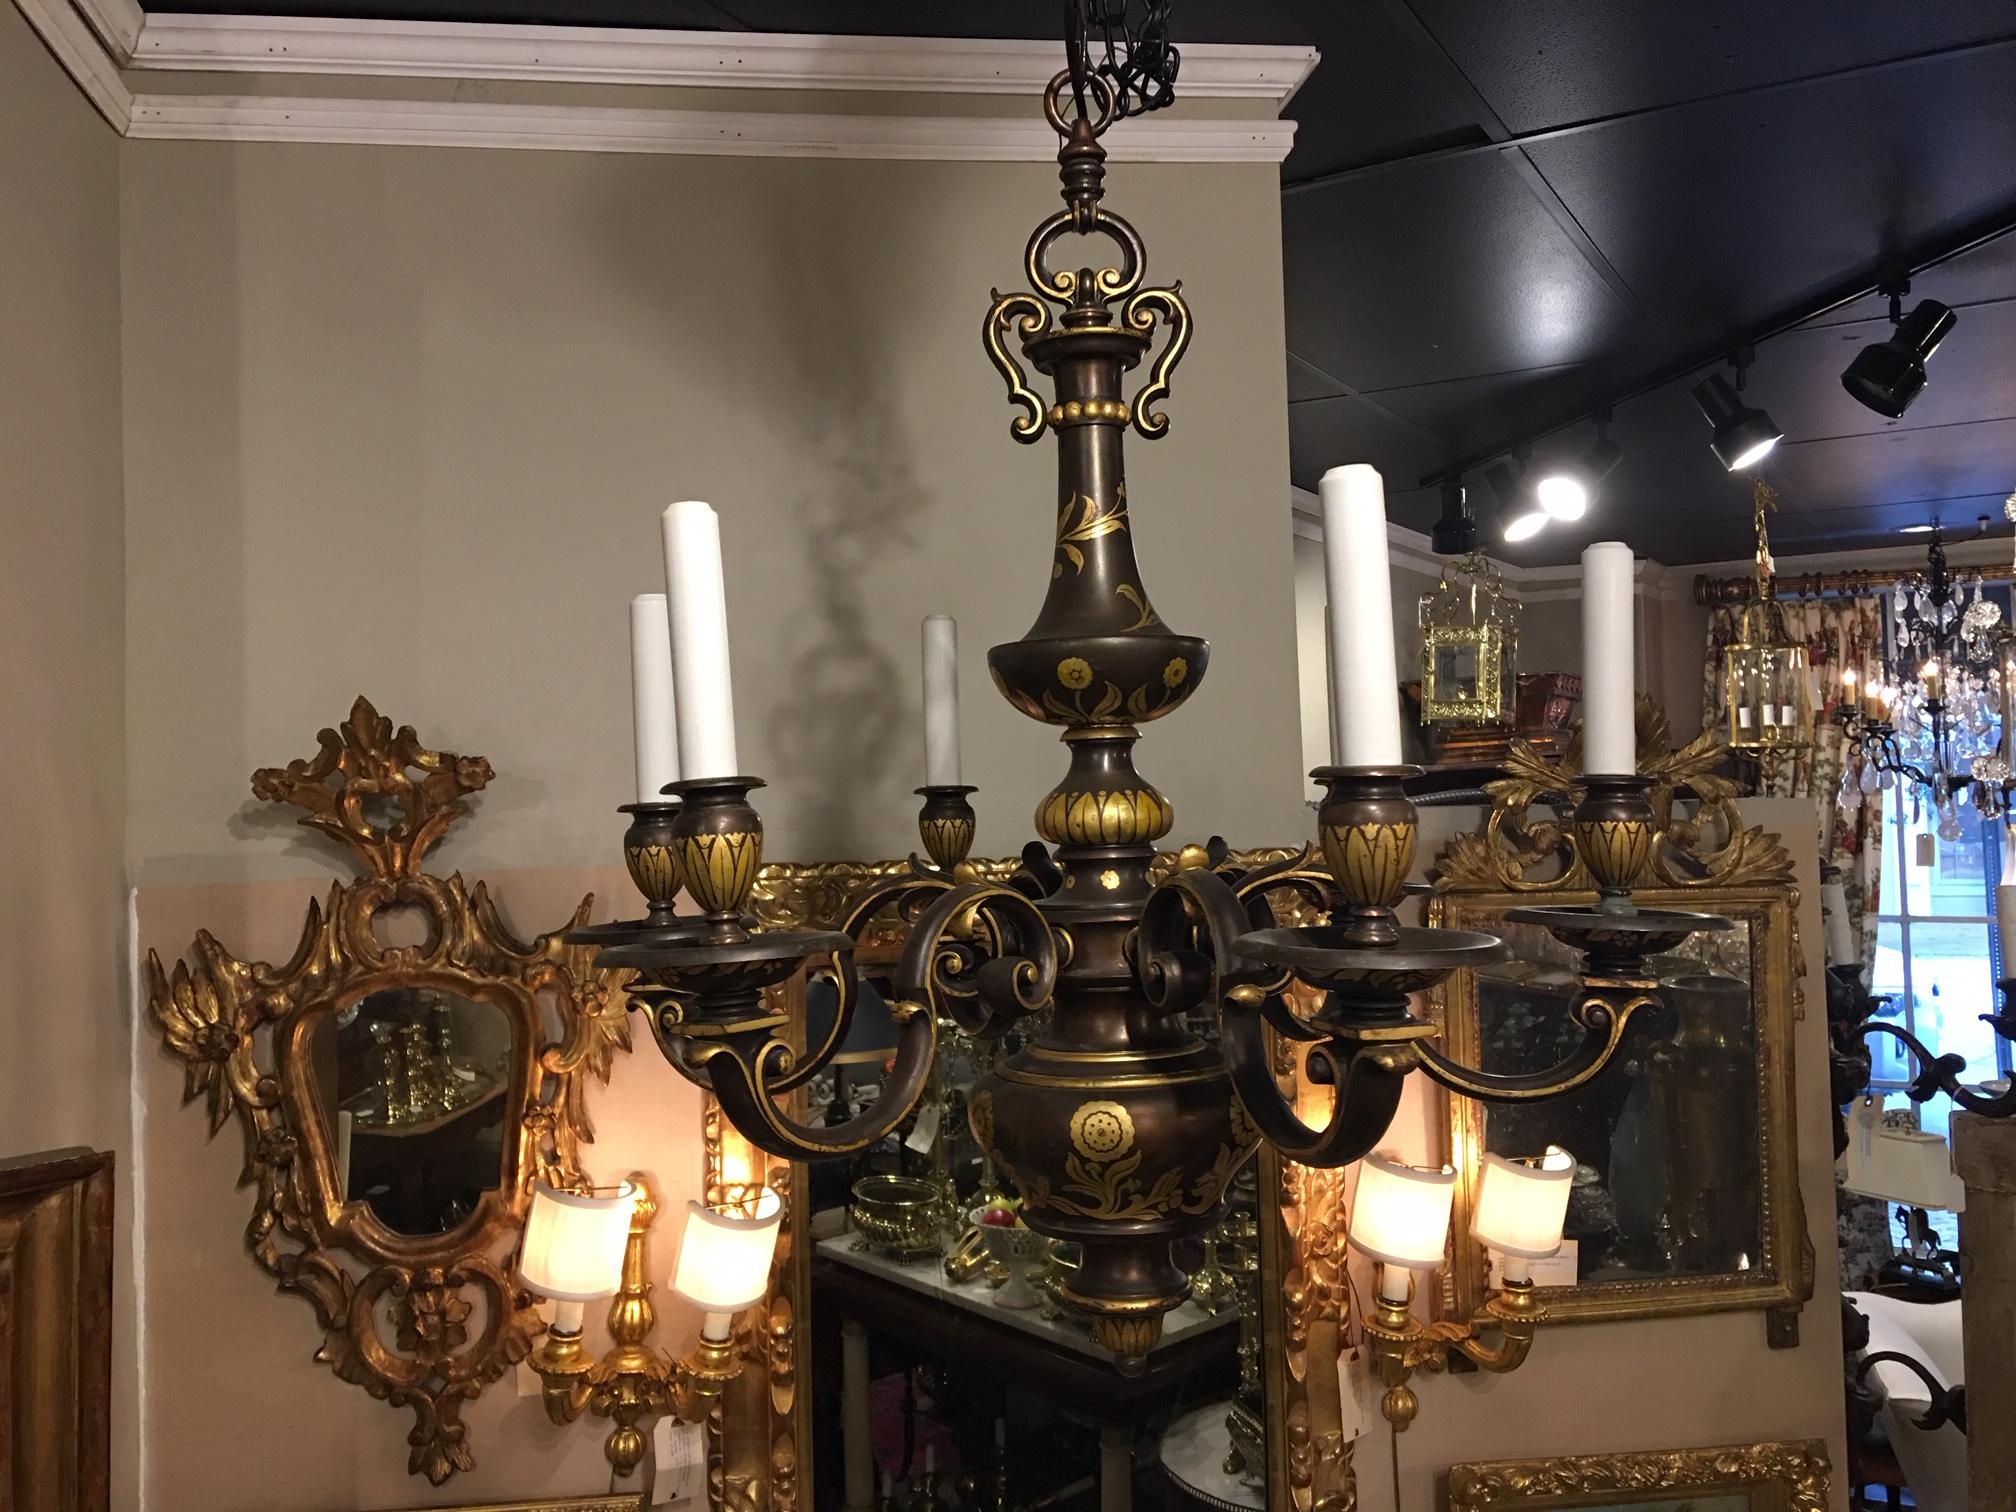 A six-light Flemish style chandelier with a full-figured baluster-form body. Bronze with gilded decorations by the New York maker E F Caldwell.